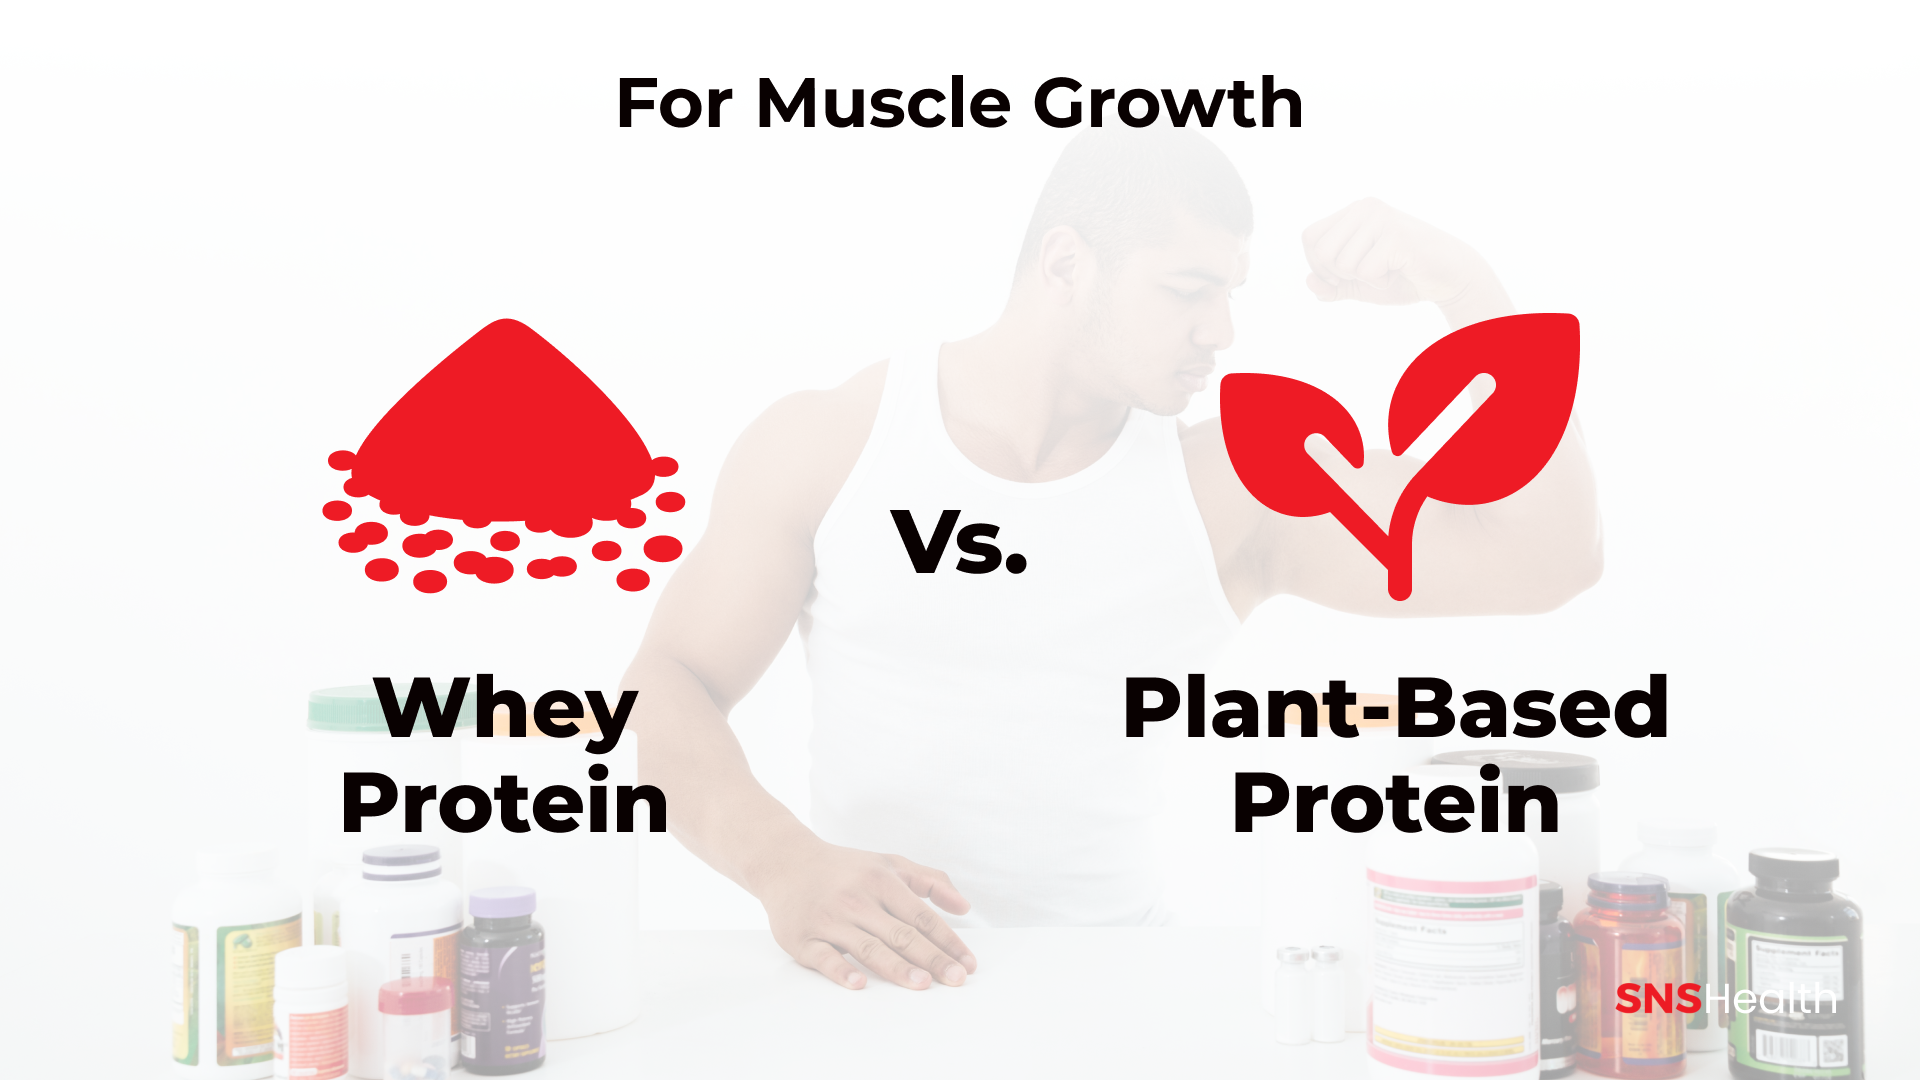 Whey Protein vs Plant-Based Protein - for muscle growth